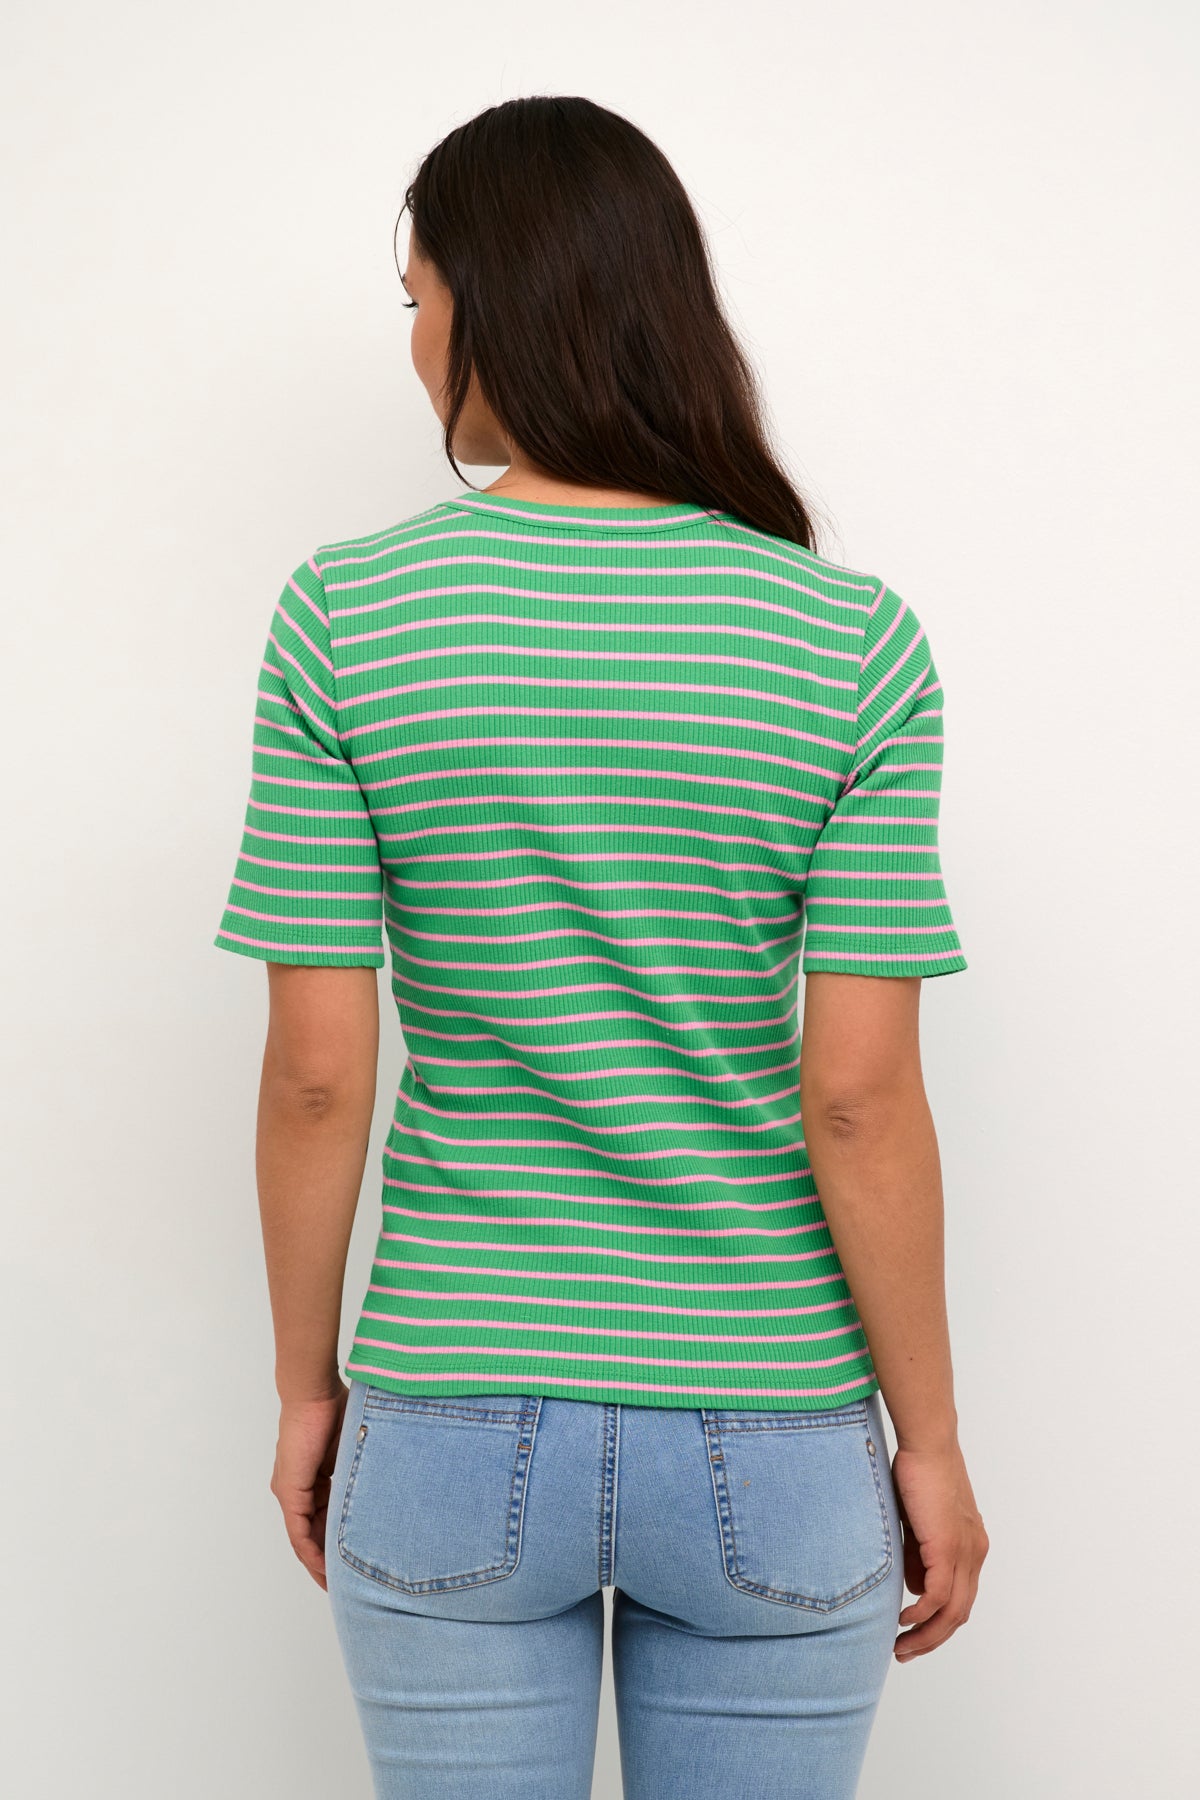 Dolly Tee in Green/Pink Stripe